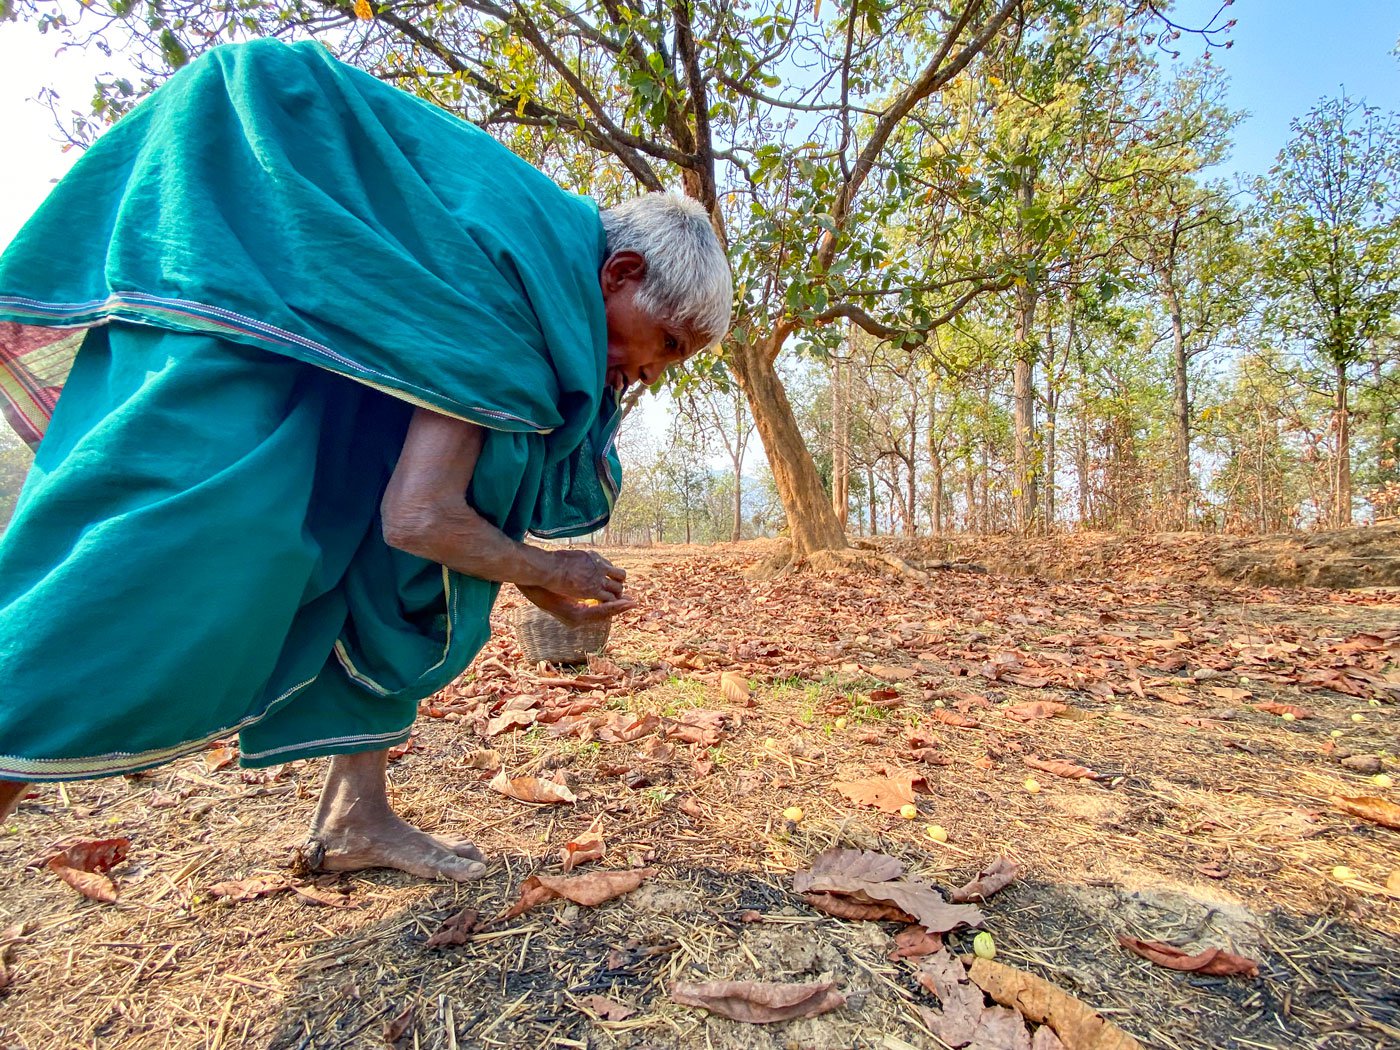 75-year-old Chherken Rathia is also busy in collecting mahua . She says she has been doing this since she was a child